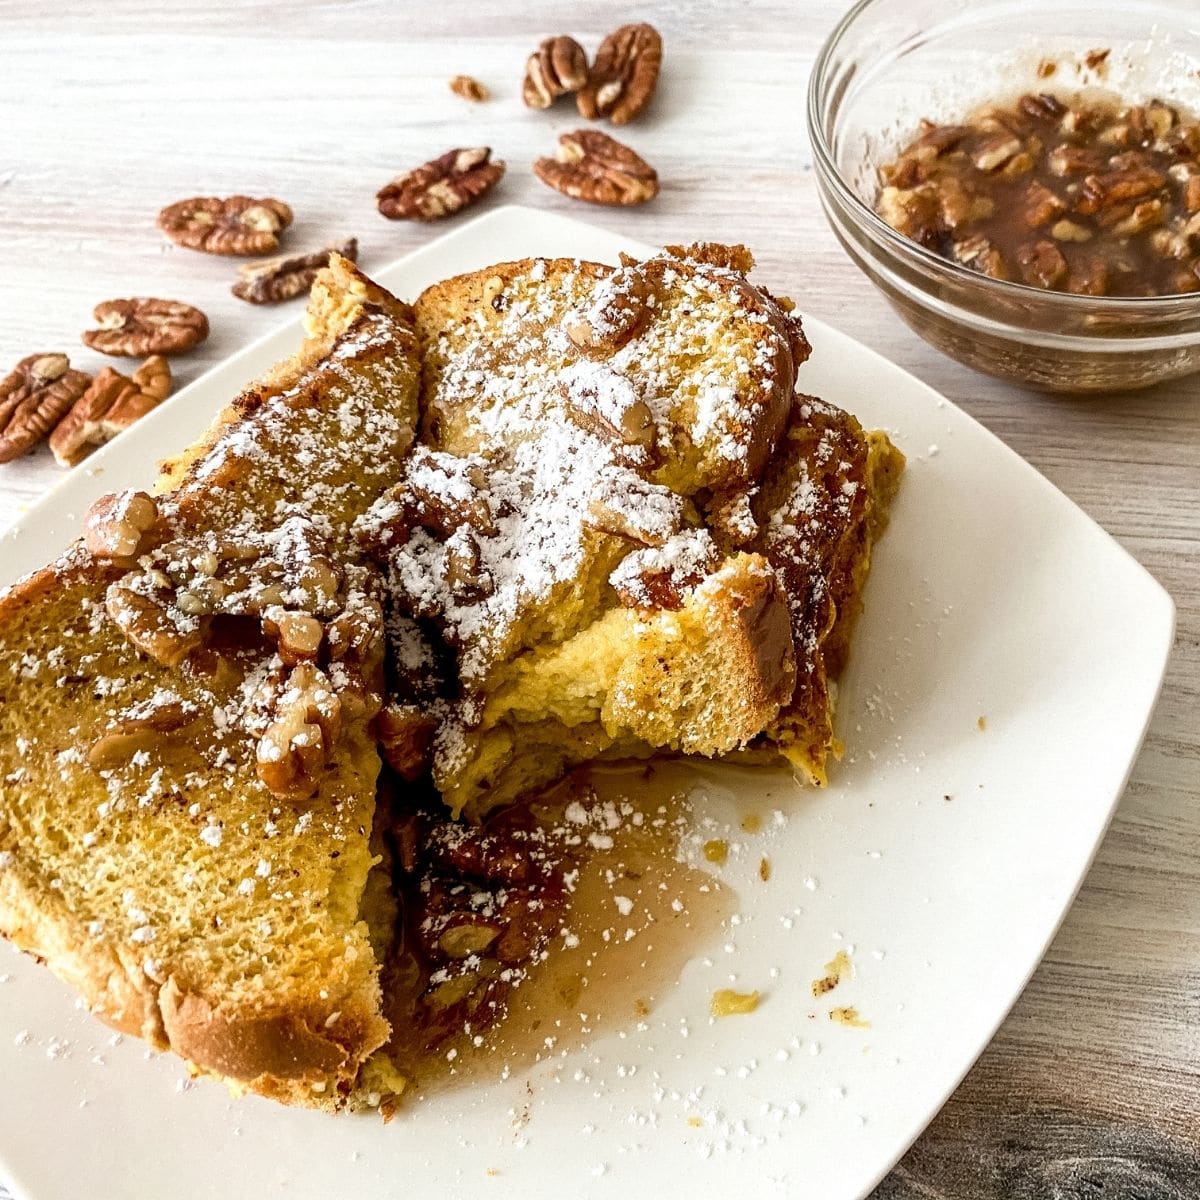 Eggnog French toast with maple pecan toppings